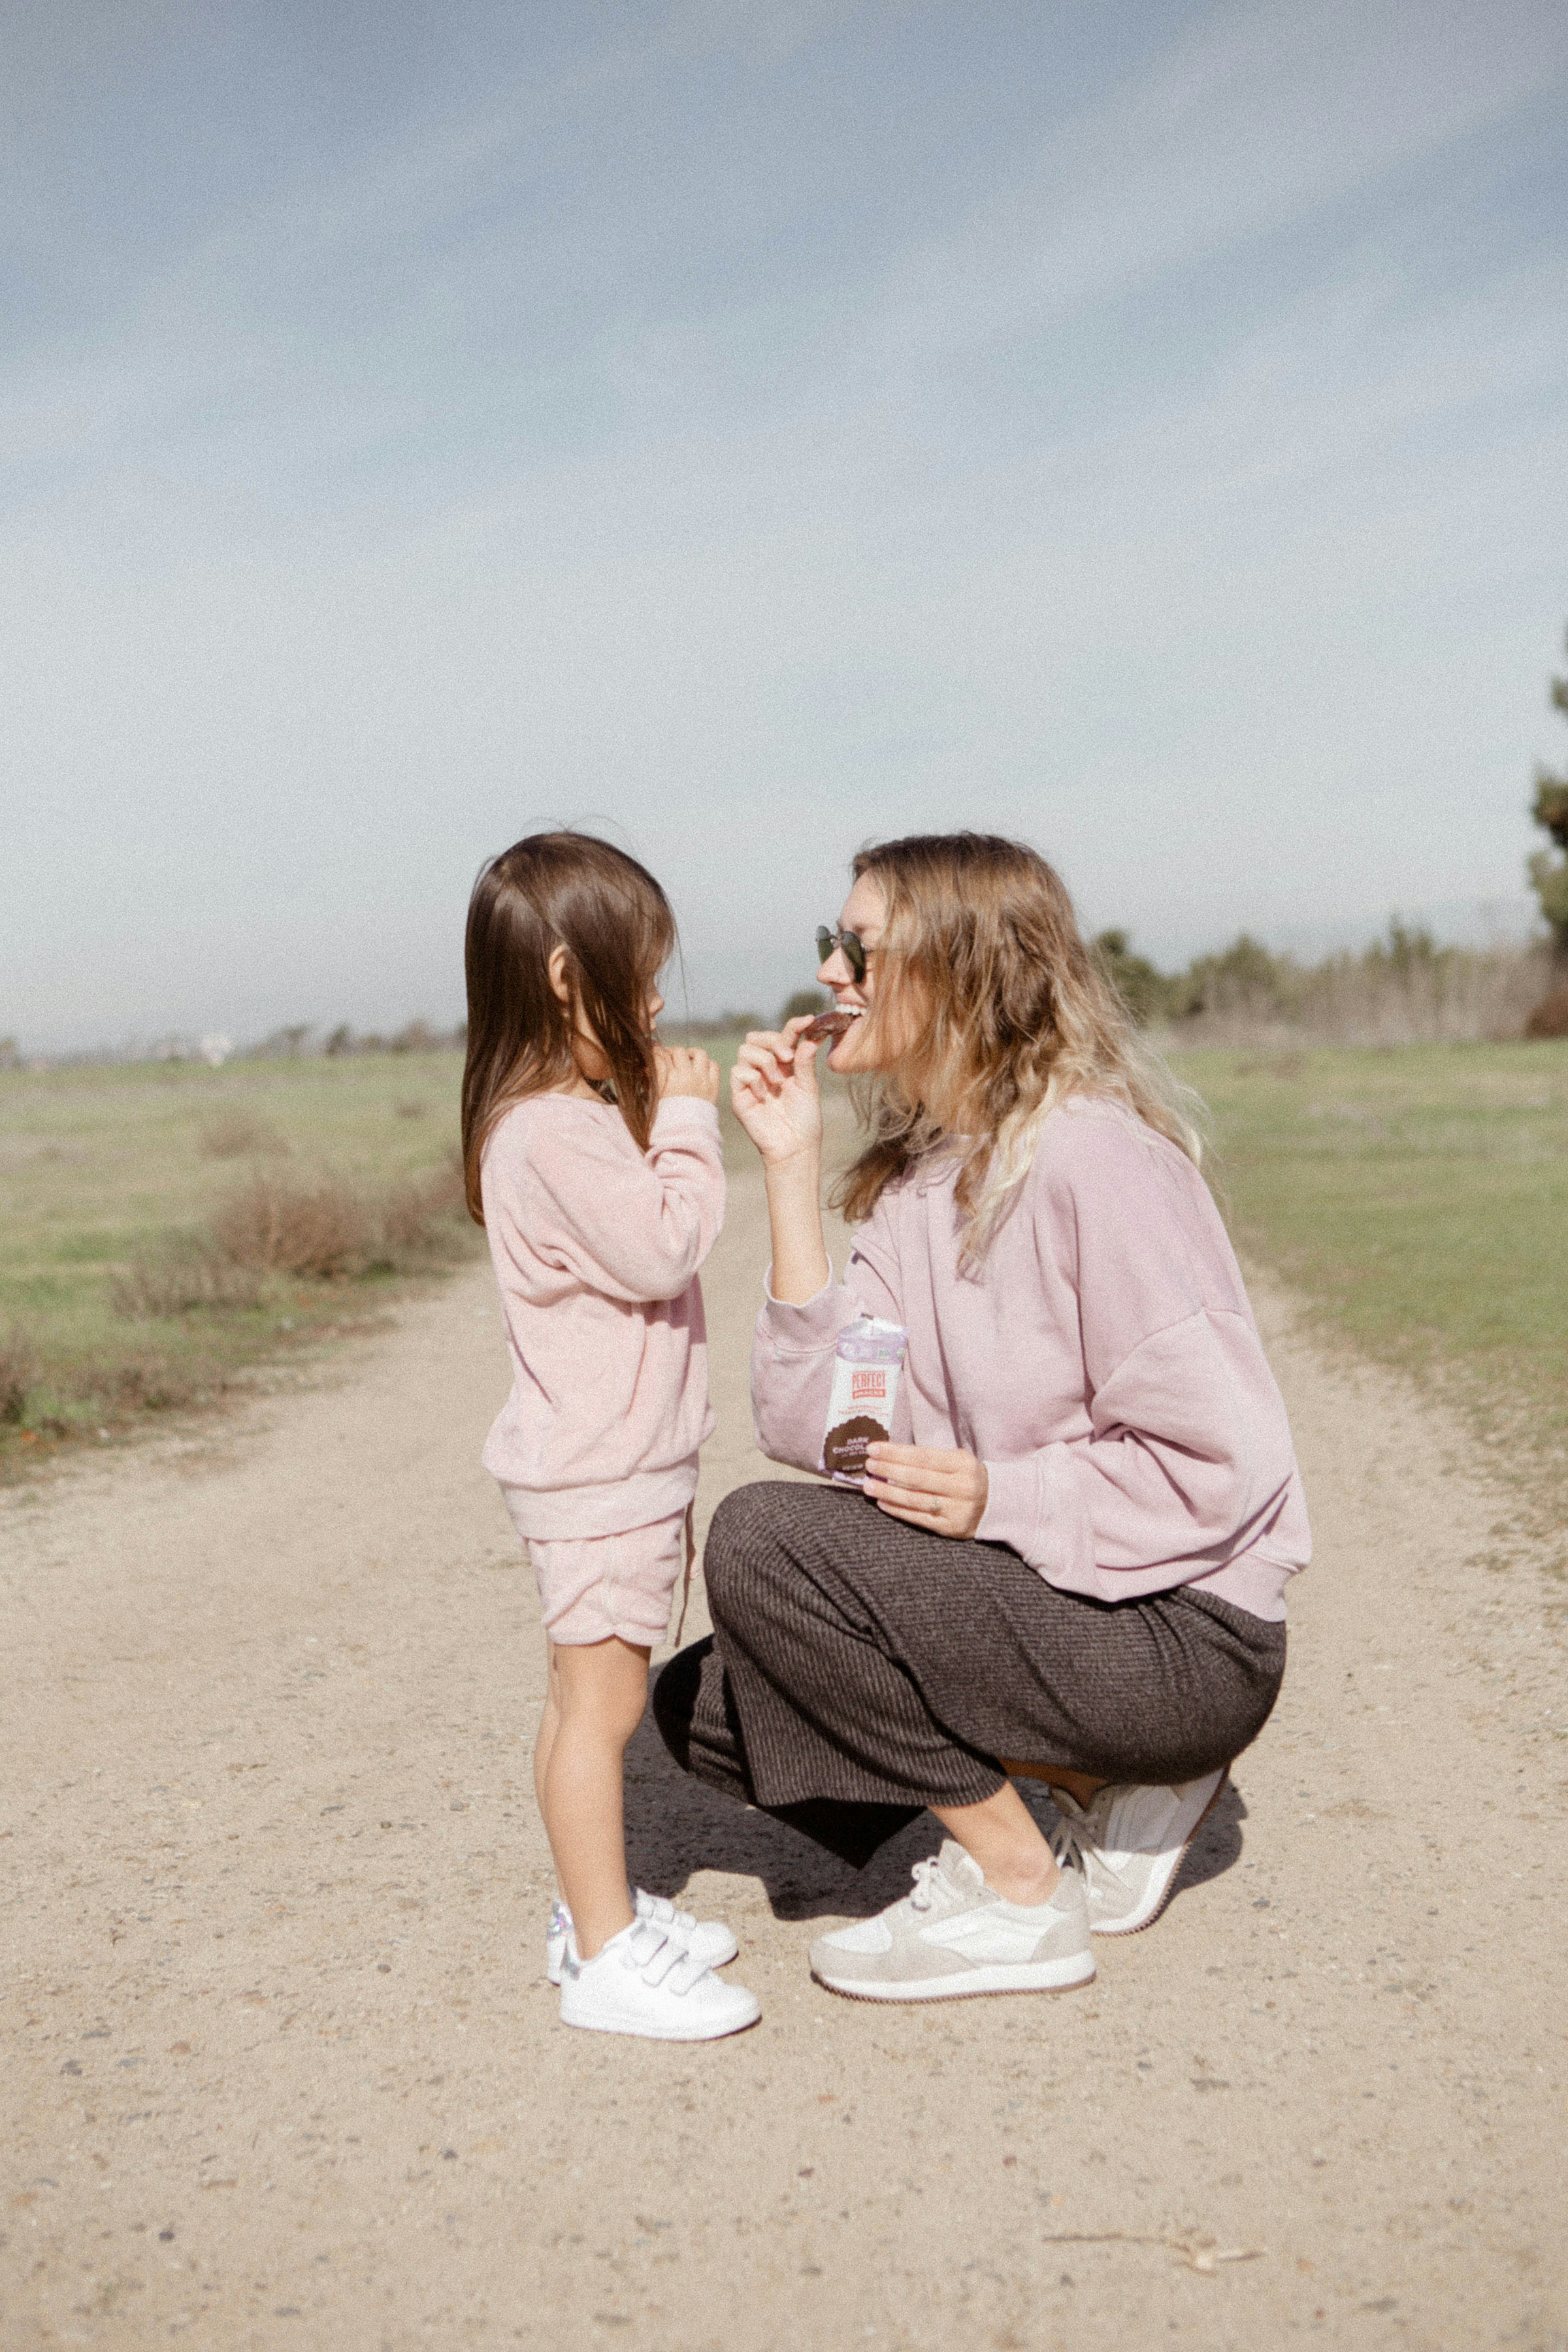 A mom and daughter on a dirt road | Source: Unsplash